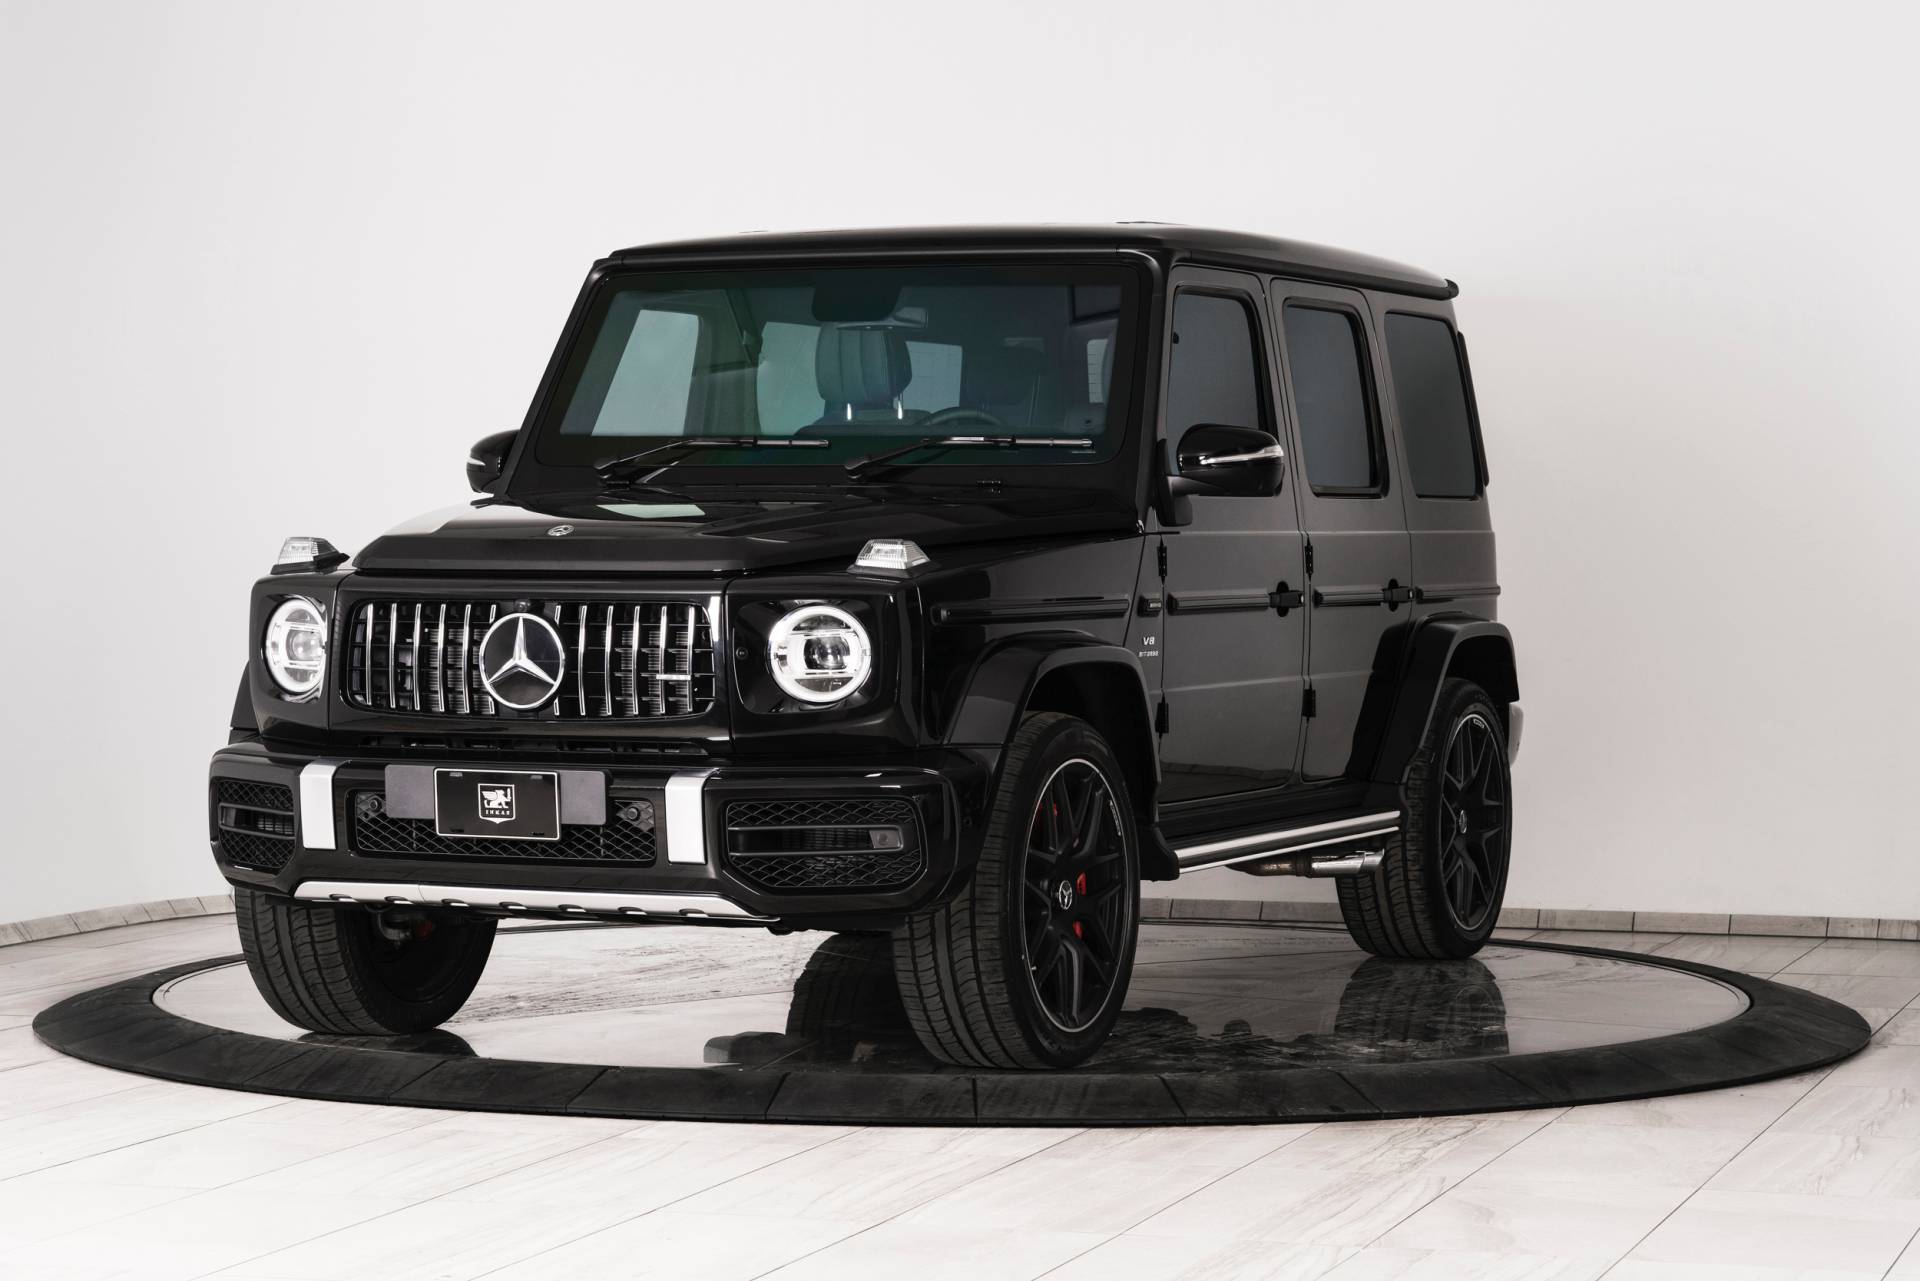 New INKAS Armored Mercedes AMG G63 Now Available to Order